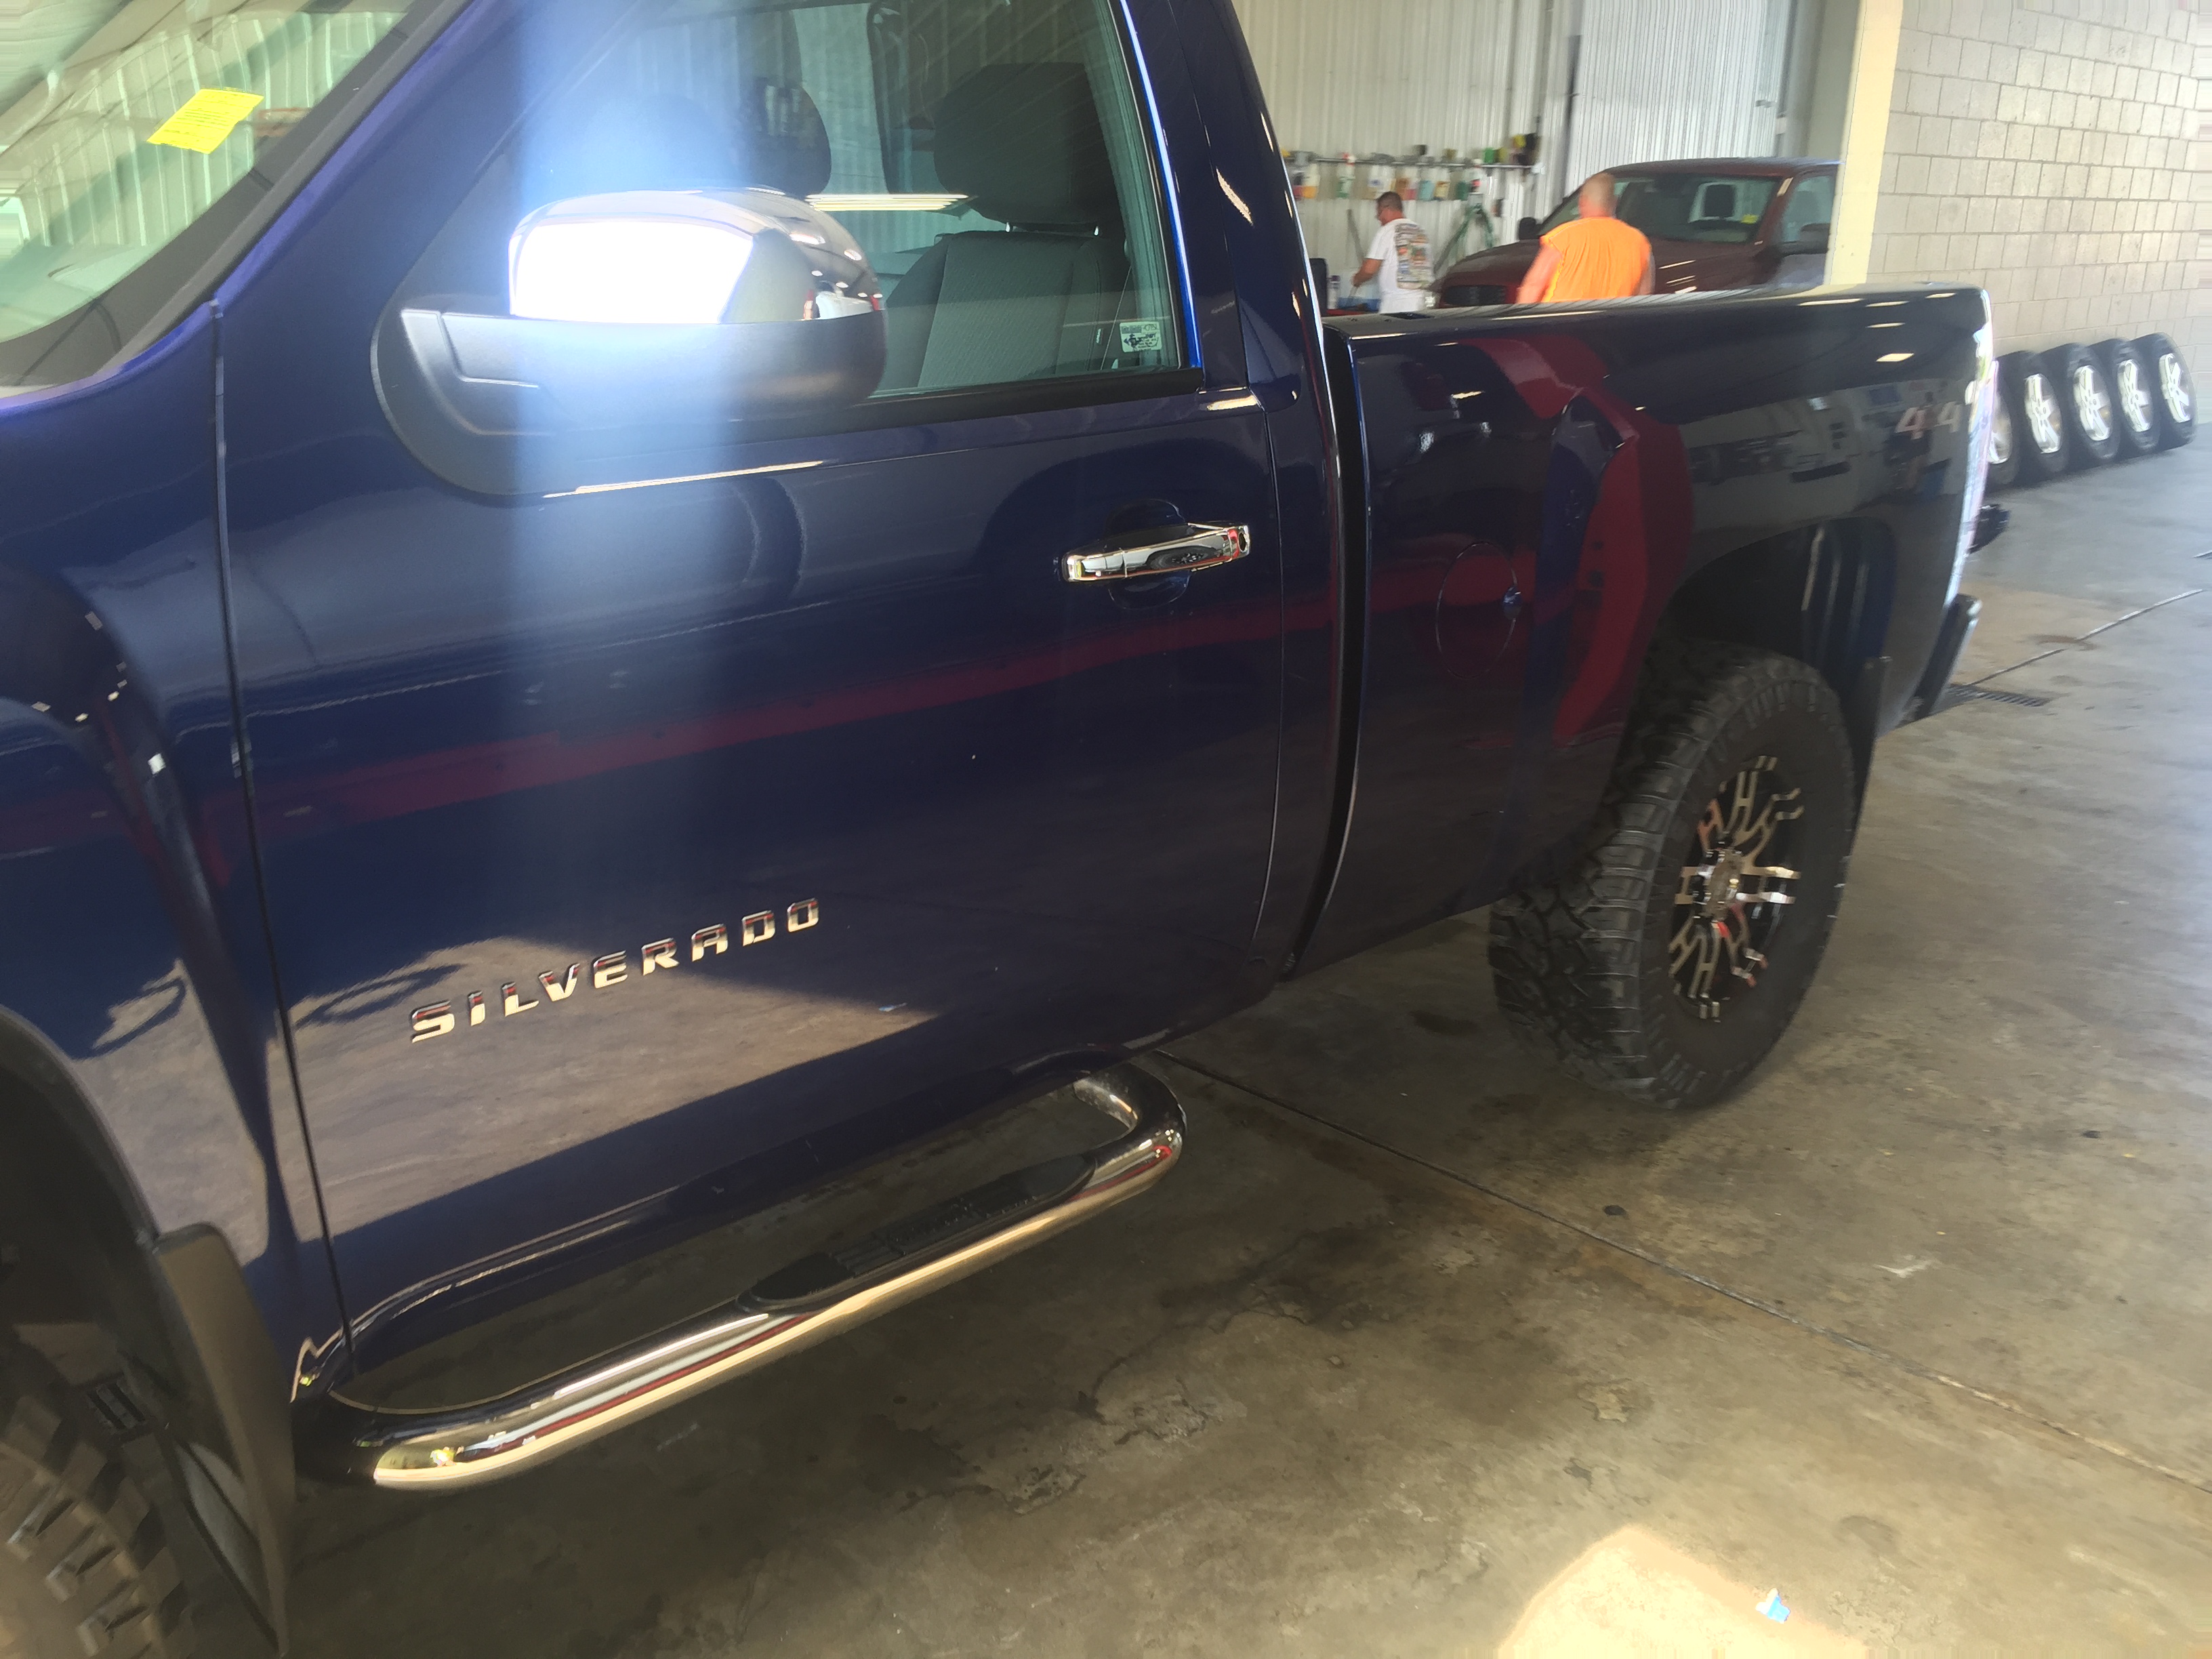 2013 Chevy Silverado, dent repair on the bedside removed with paintless dent removal, in or around Springfield, IL, http://217dent.com